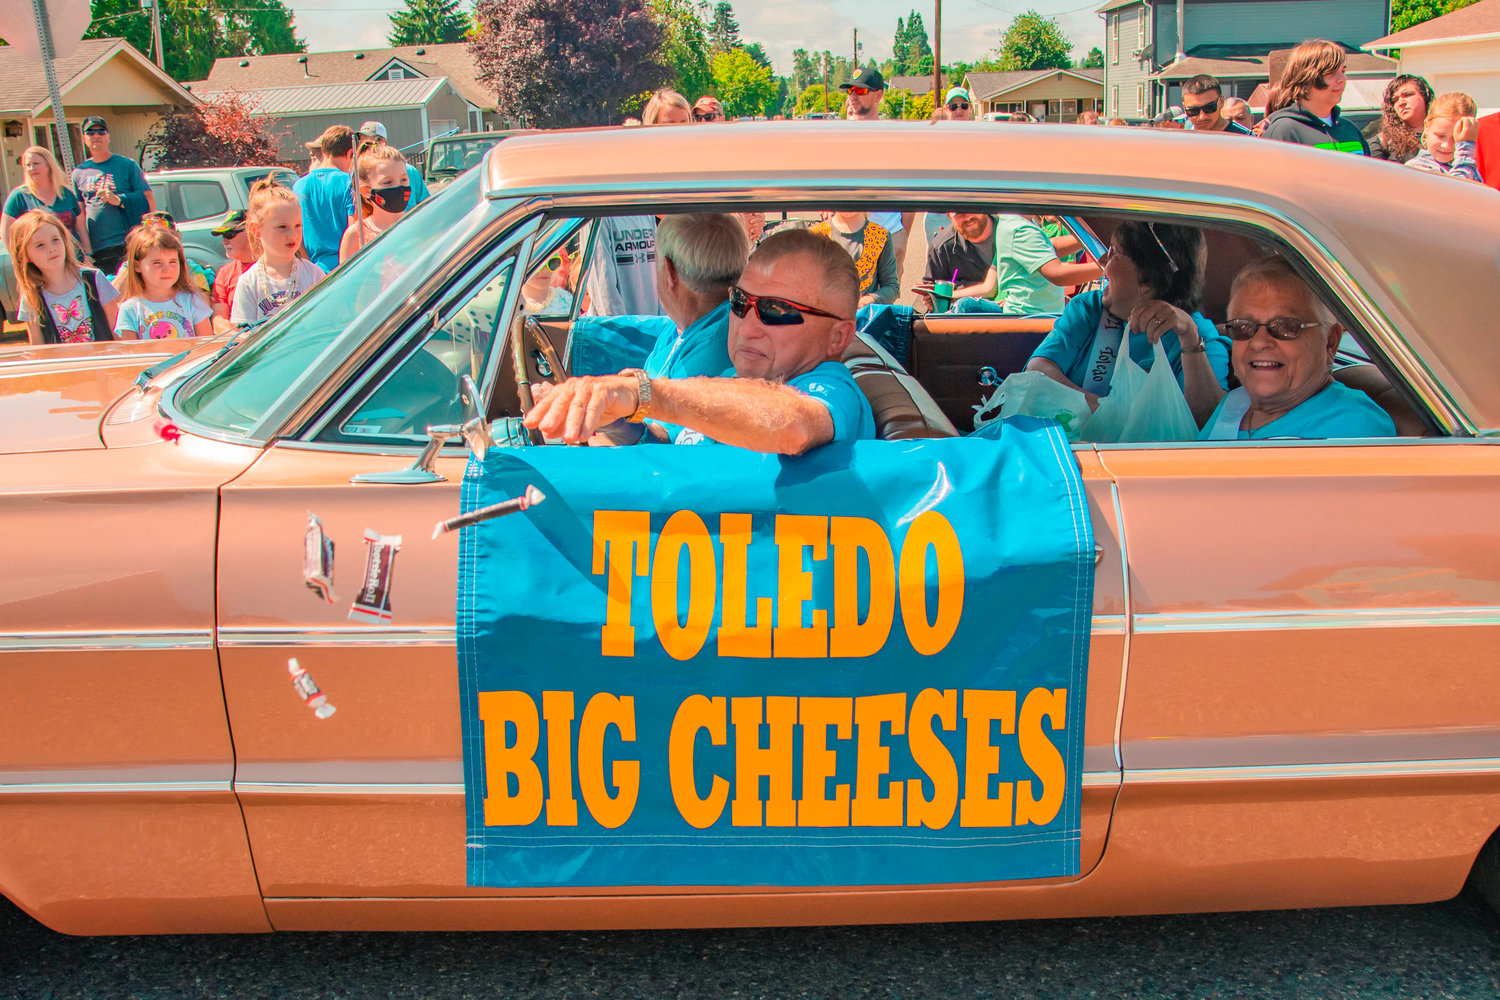 Candy is thrown to crowds as the Big Cheeses drive by during a parade in downtown Toledo on Saturday.